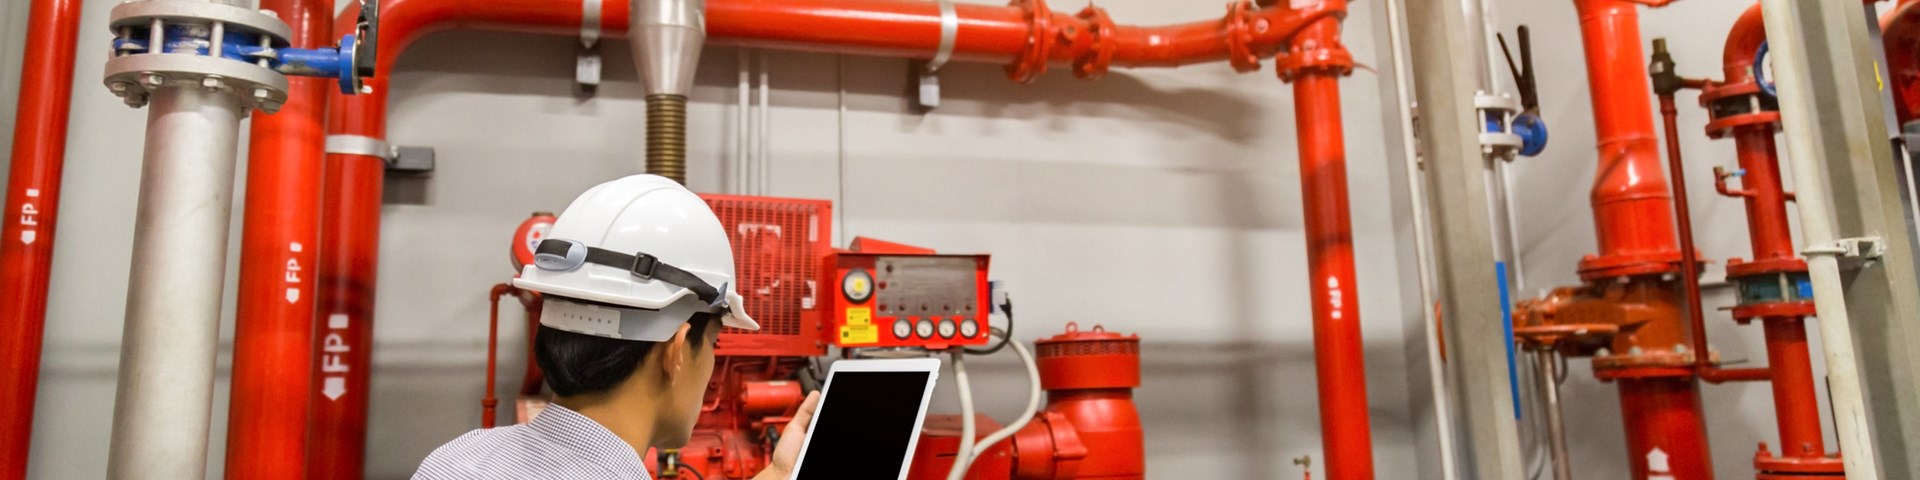 engineer checking fire alarm control system 